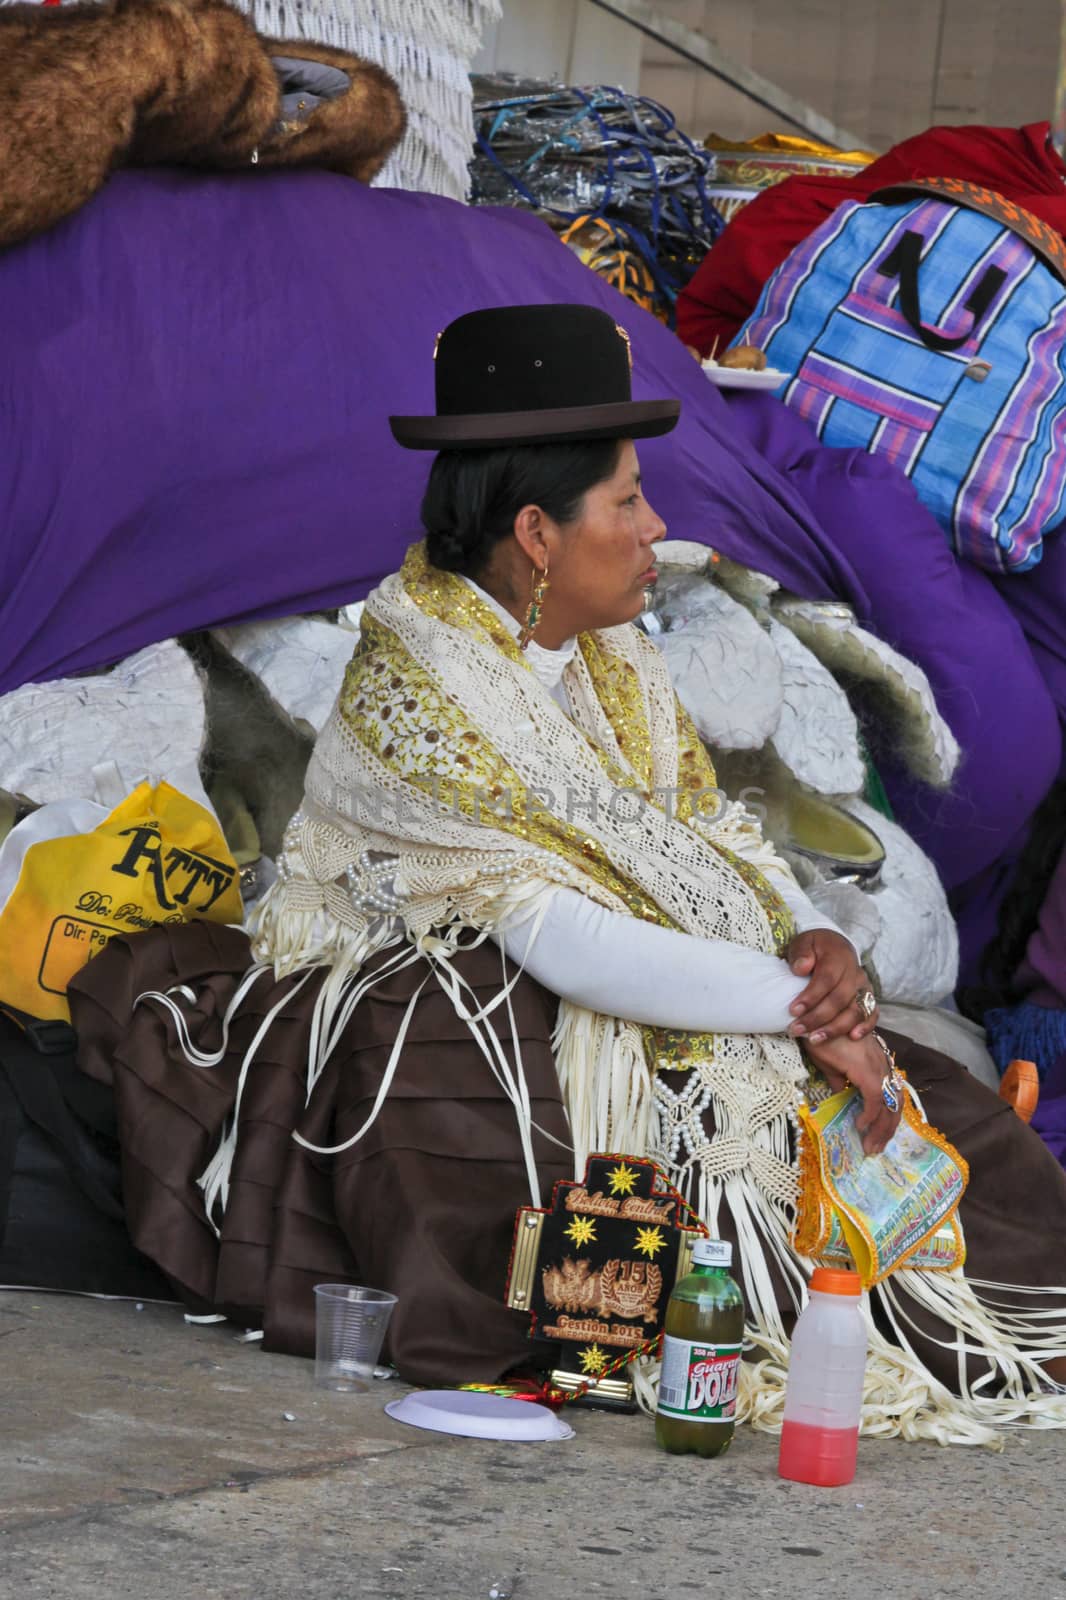 SAO PAULO, BRAZIL August 9 2015: An unidentified woman with typical costumes wait for the Morenada parade in Bolivian Independence Day celebration in Sao Paulo Brazil.